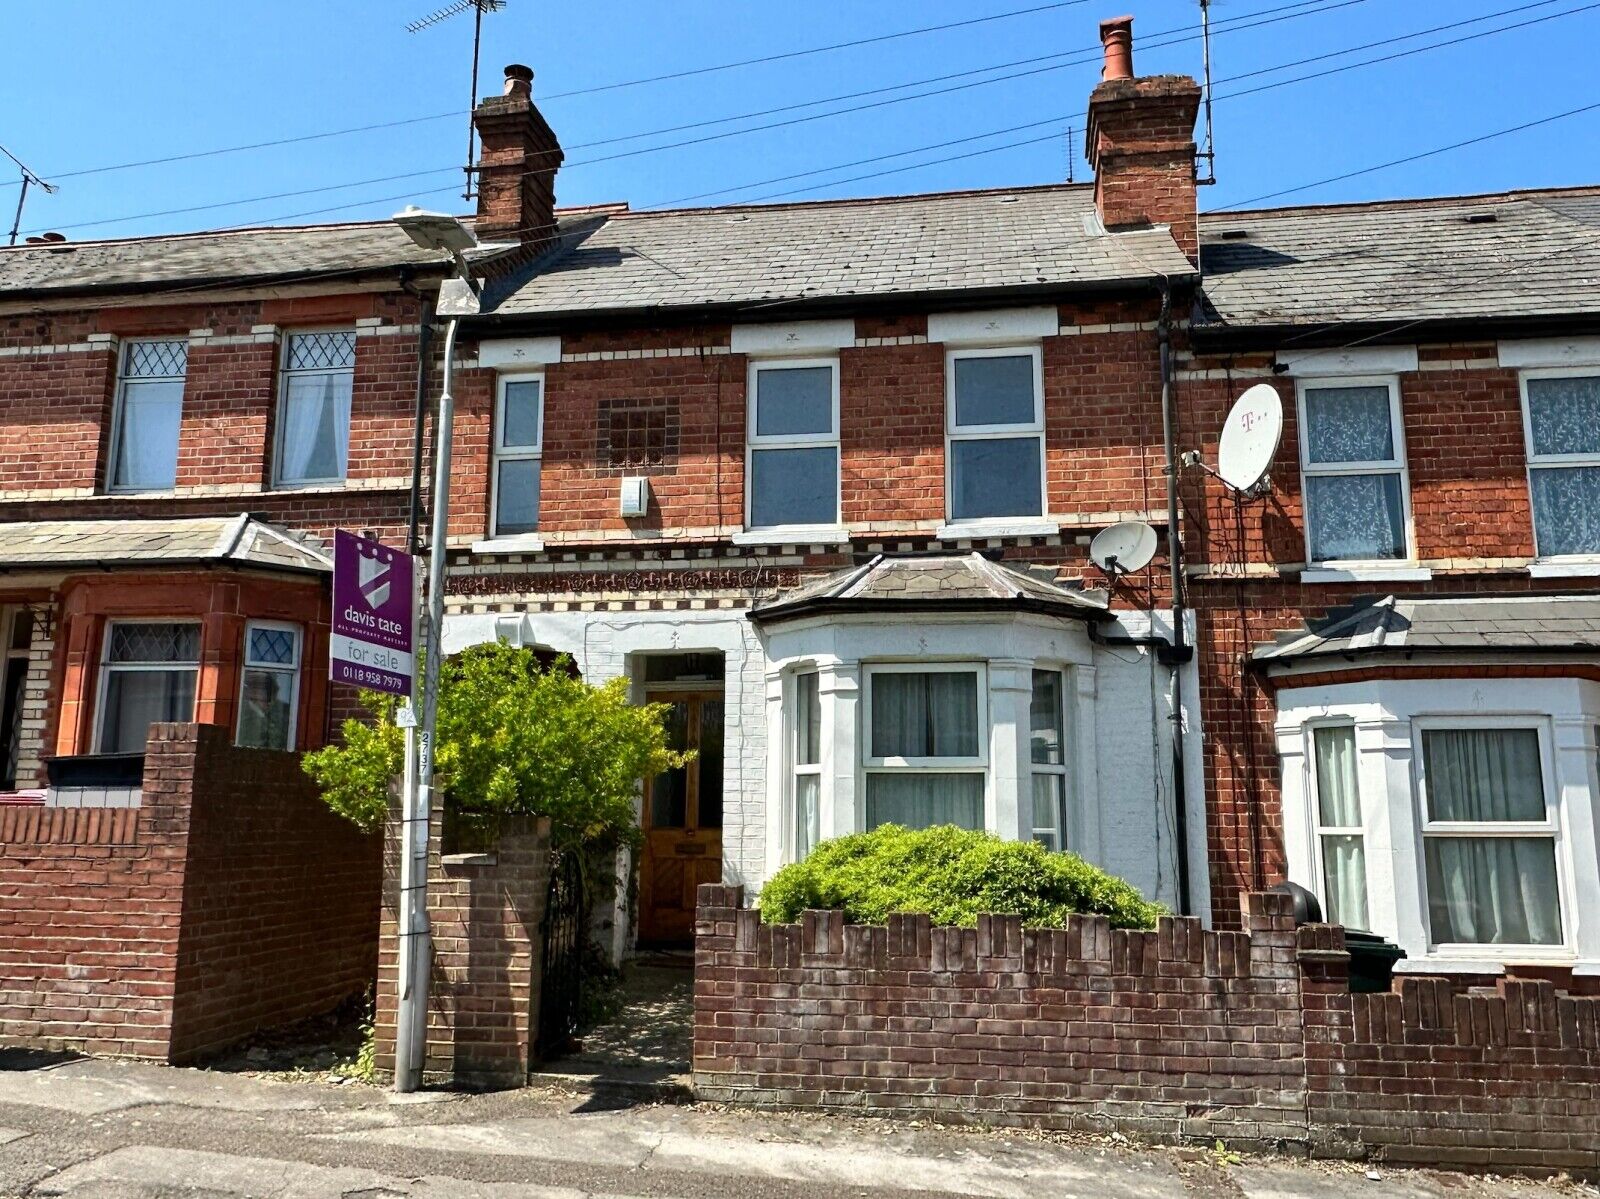 4 bedroom mid terraced house for sale Shaftesbury Road, Reading, RG30, main image